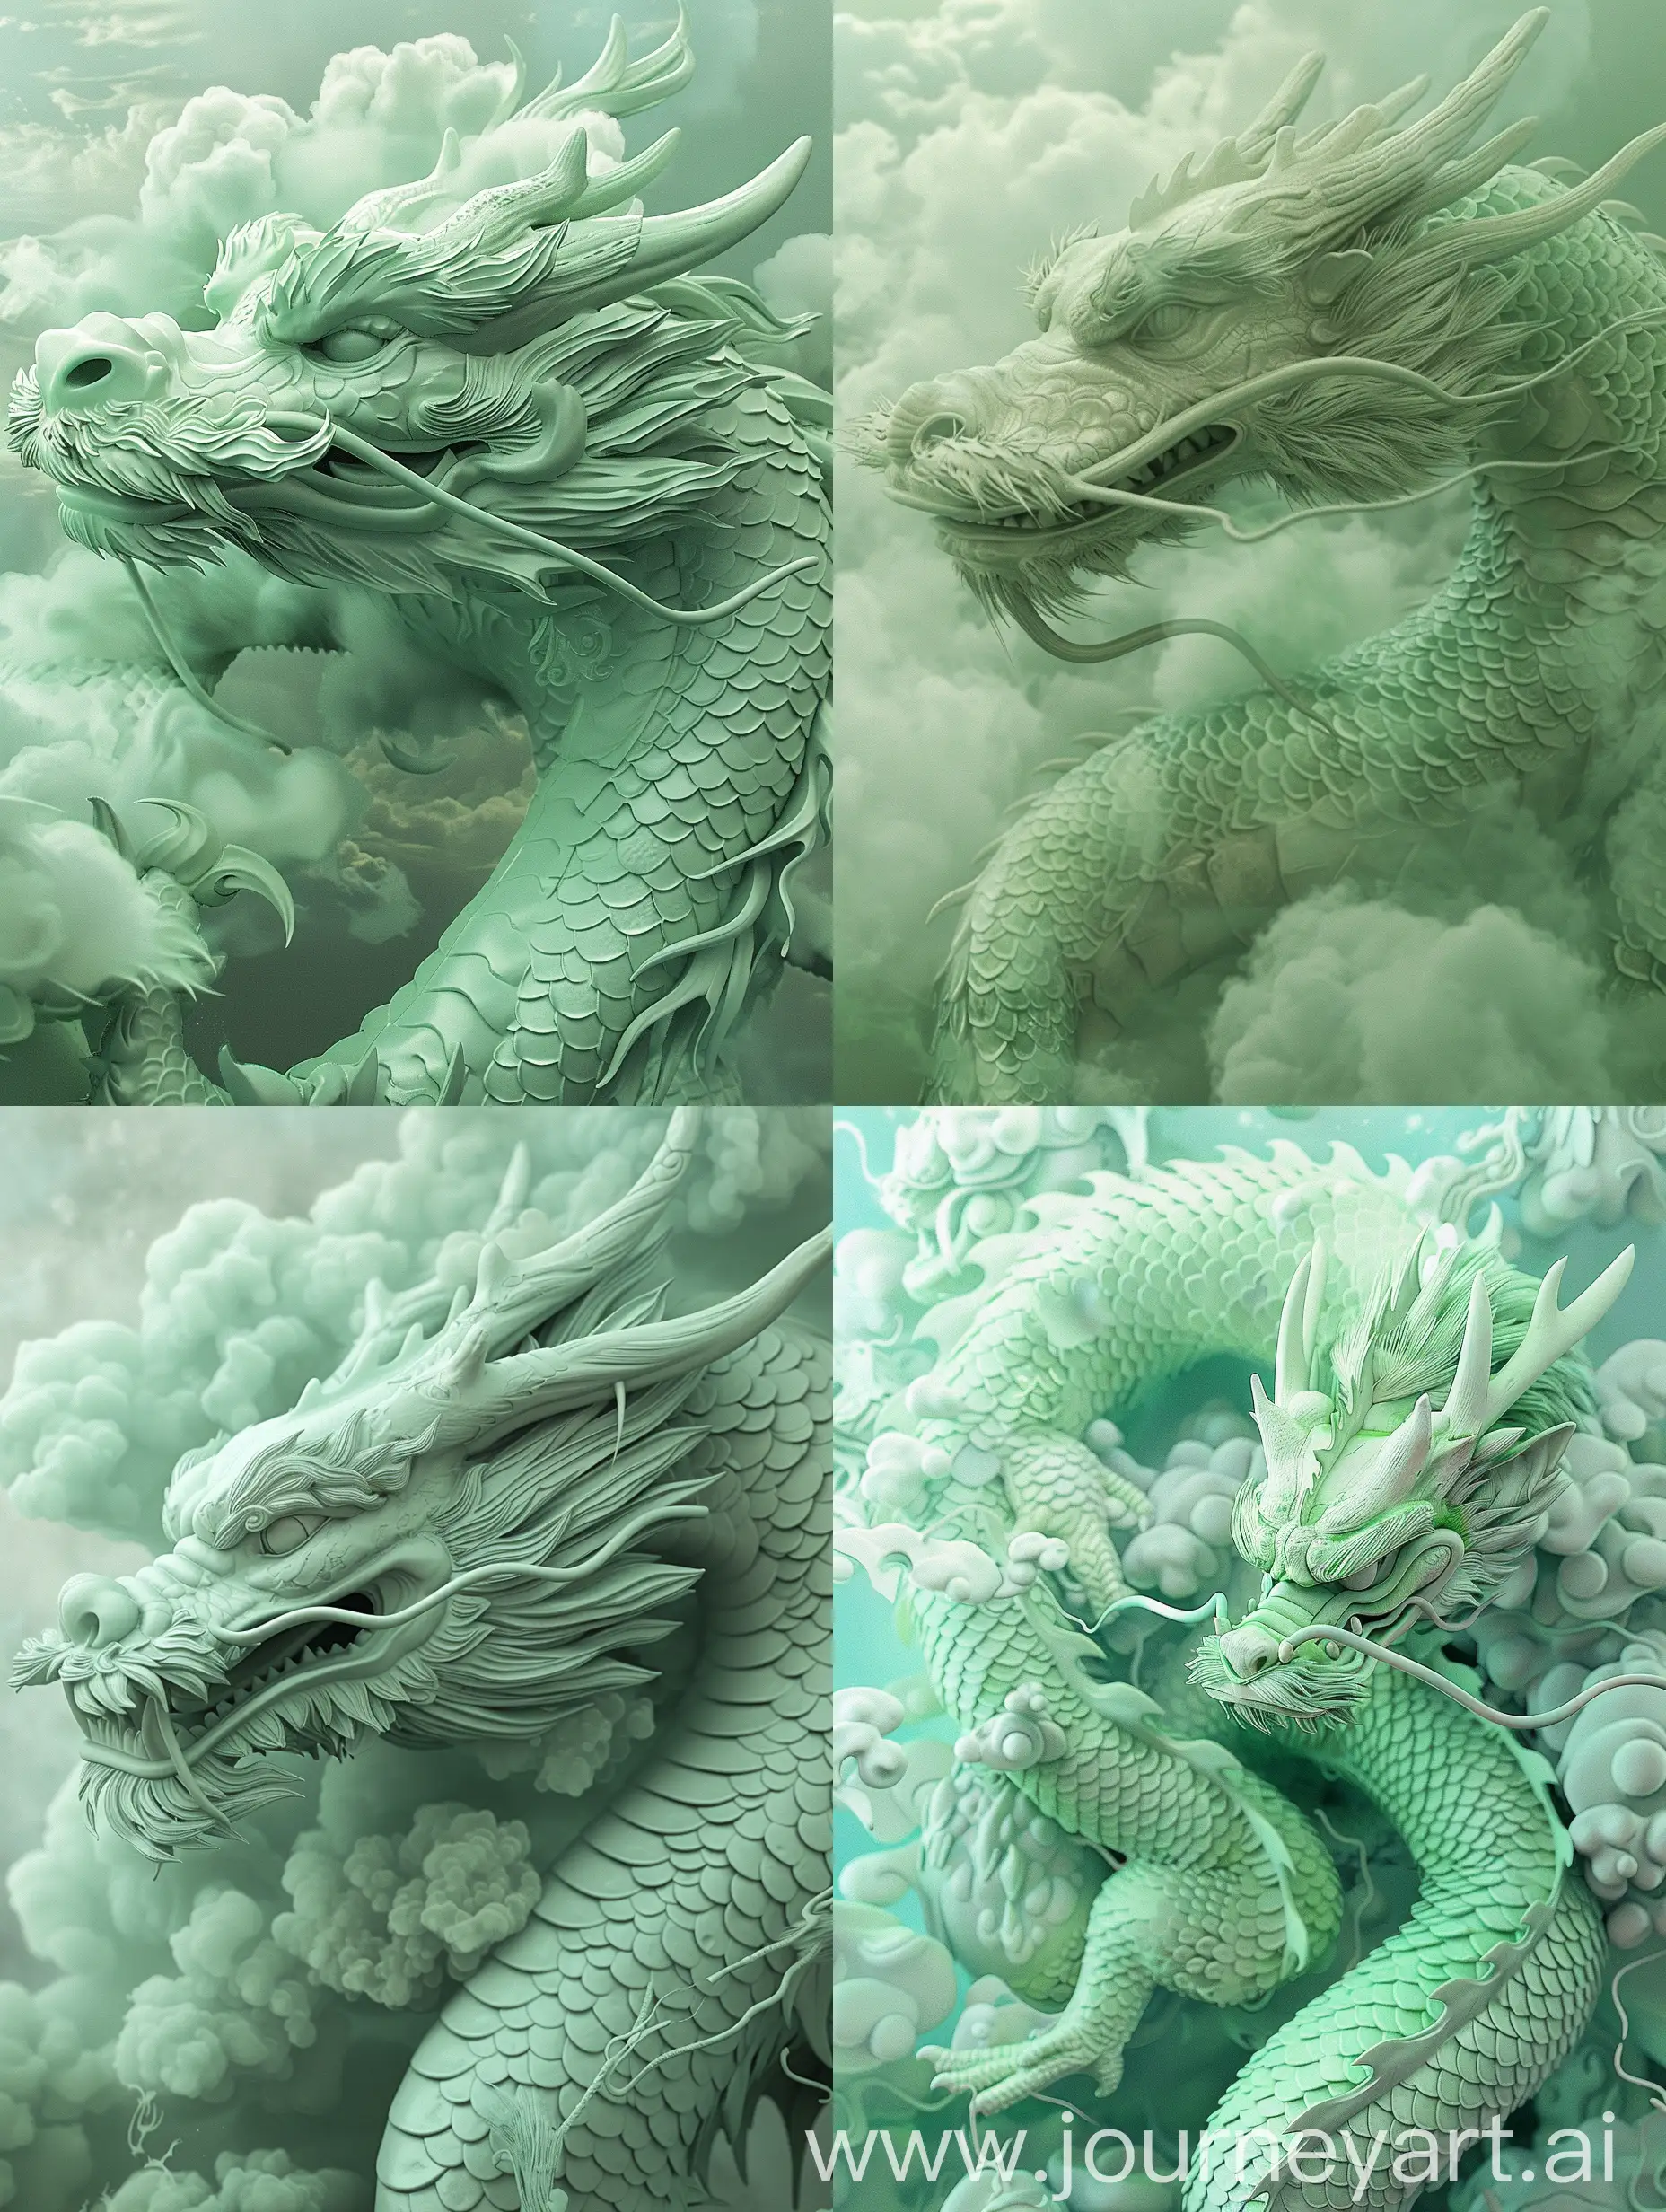 Ethereal-Light-Green-Asian-Dragon-Surrounded-by-Clouds-in-Illusory-Hyperrealism-Style